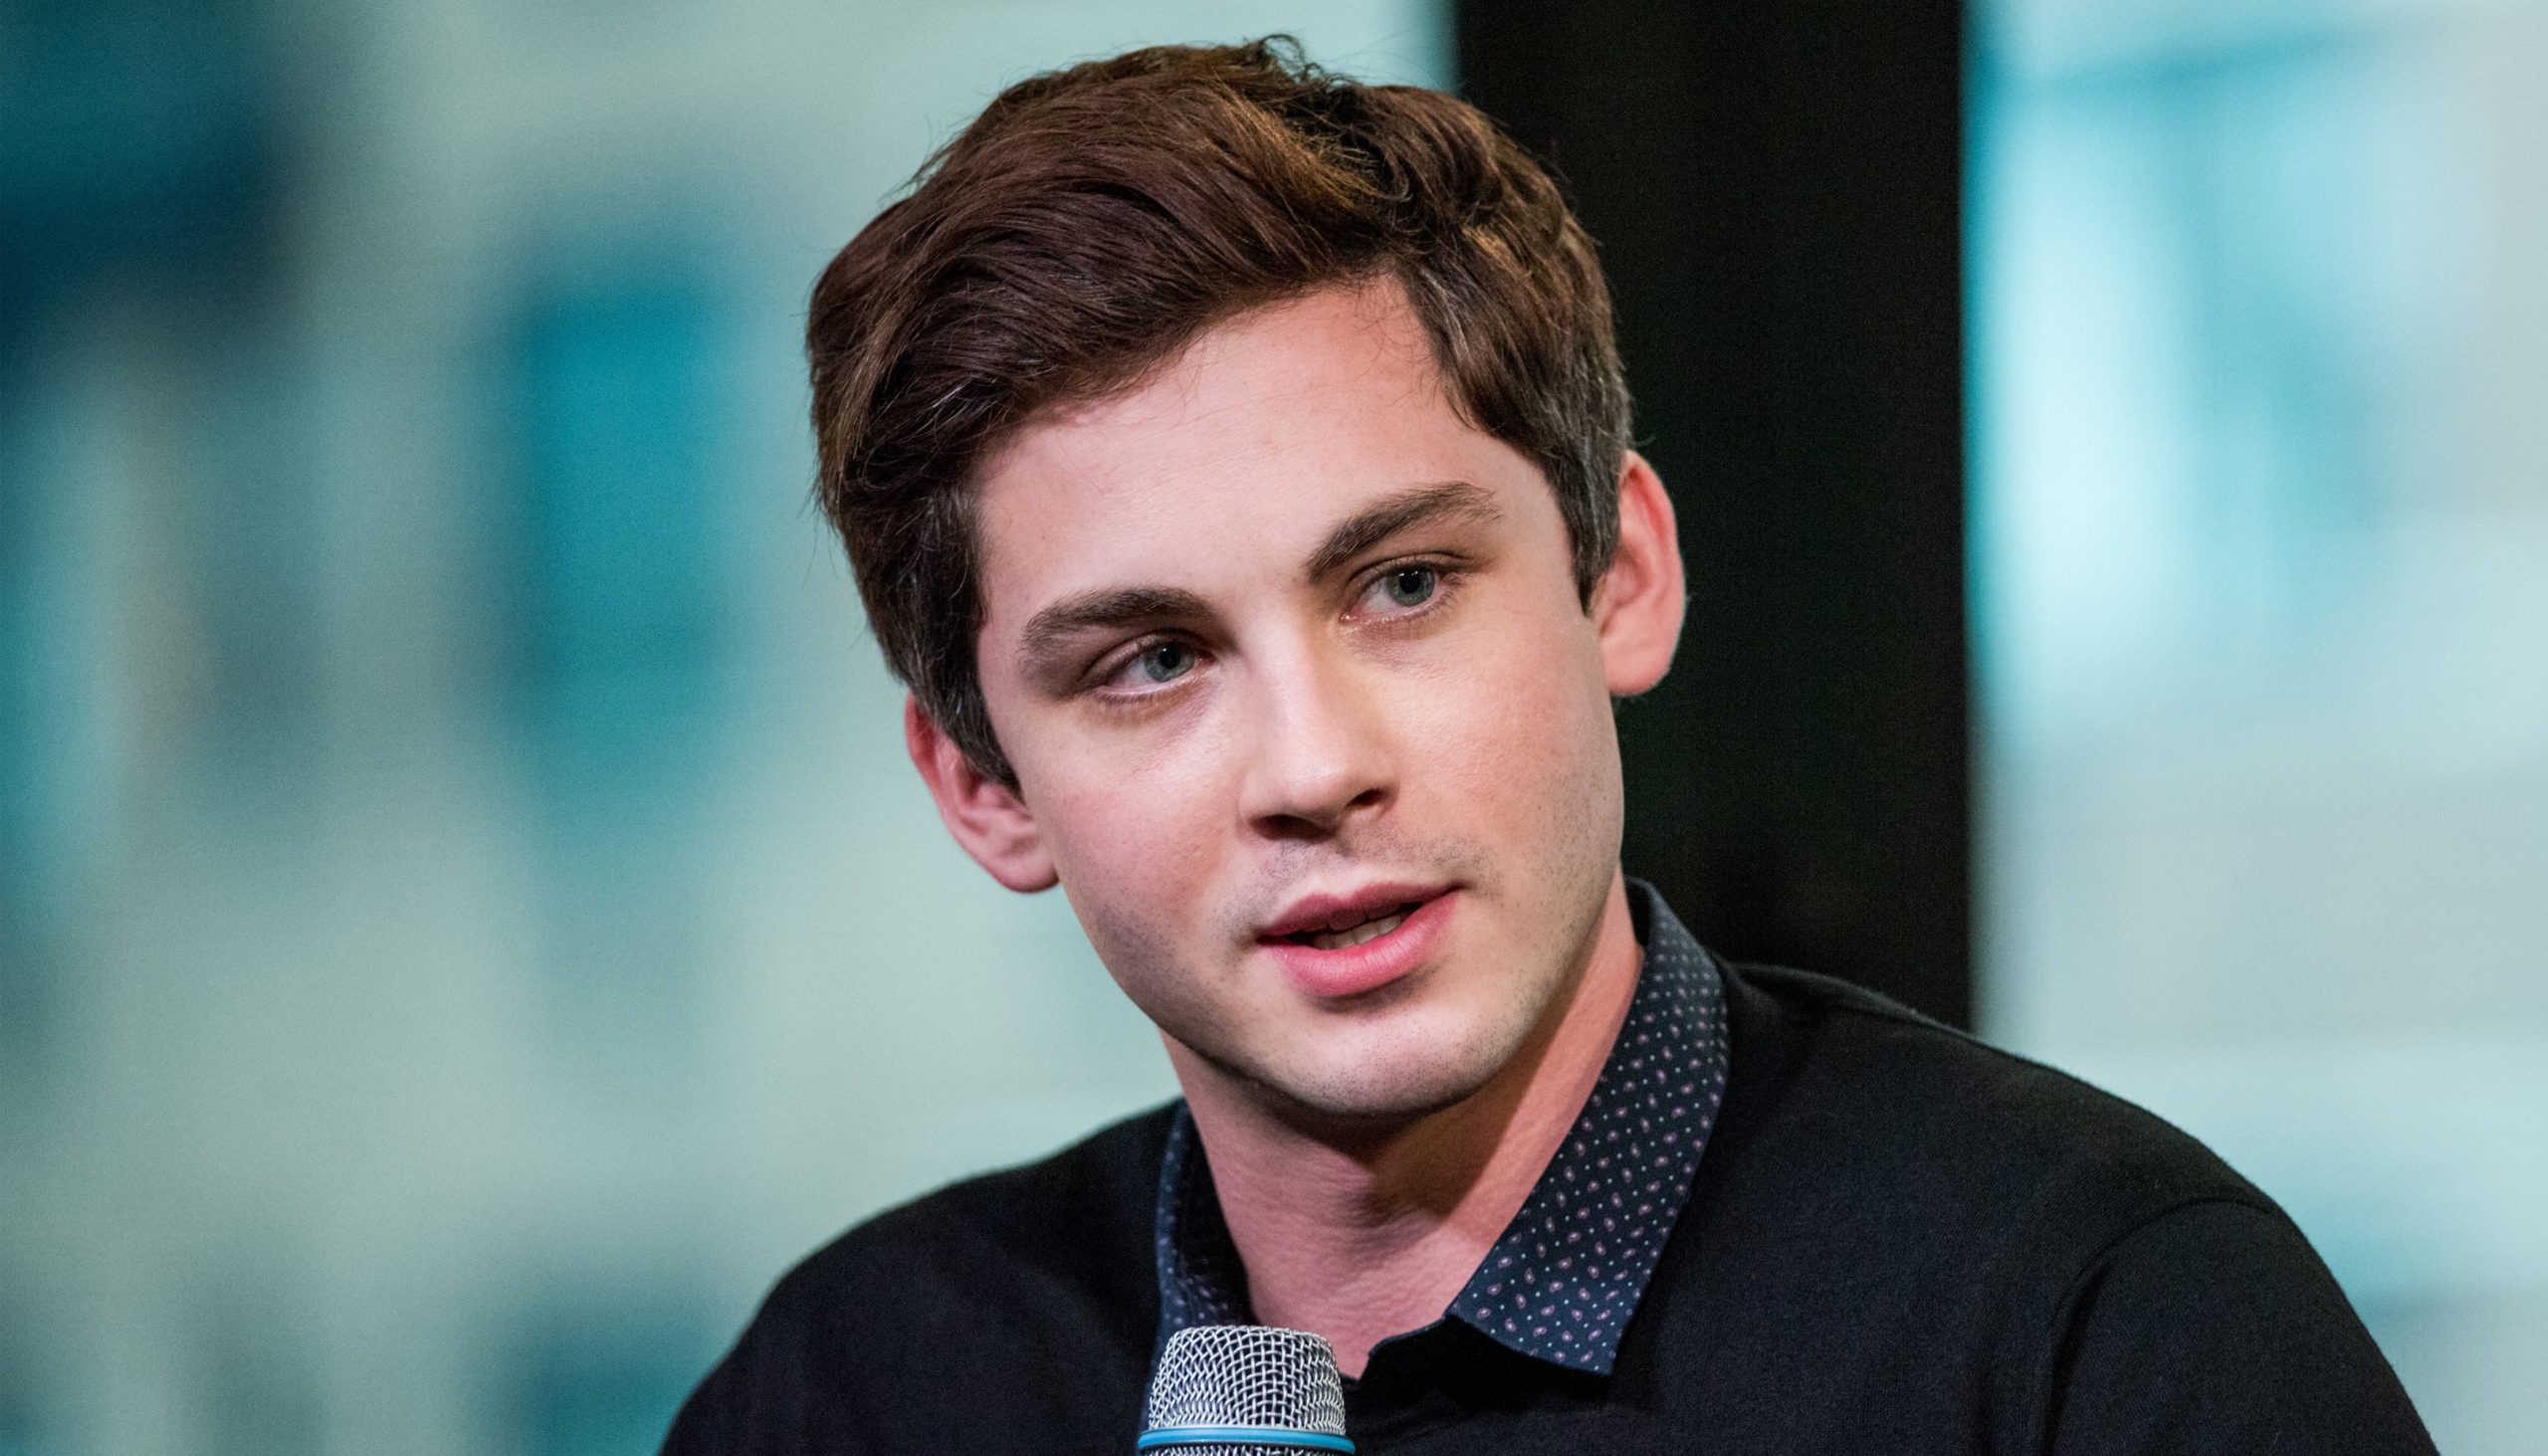 Logan Lerman Has Salt-and-Pepper Hair, and I Can't Stop Staring